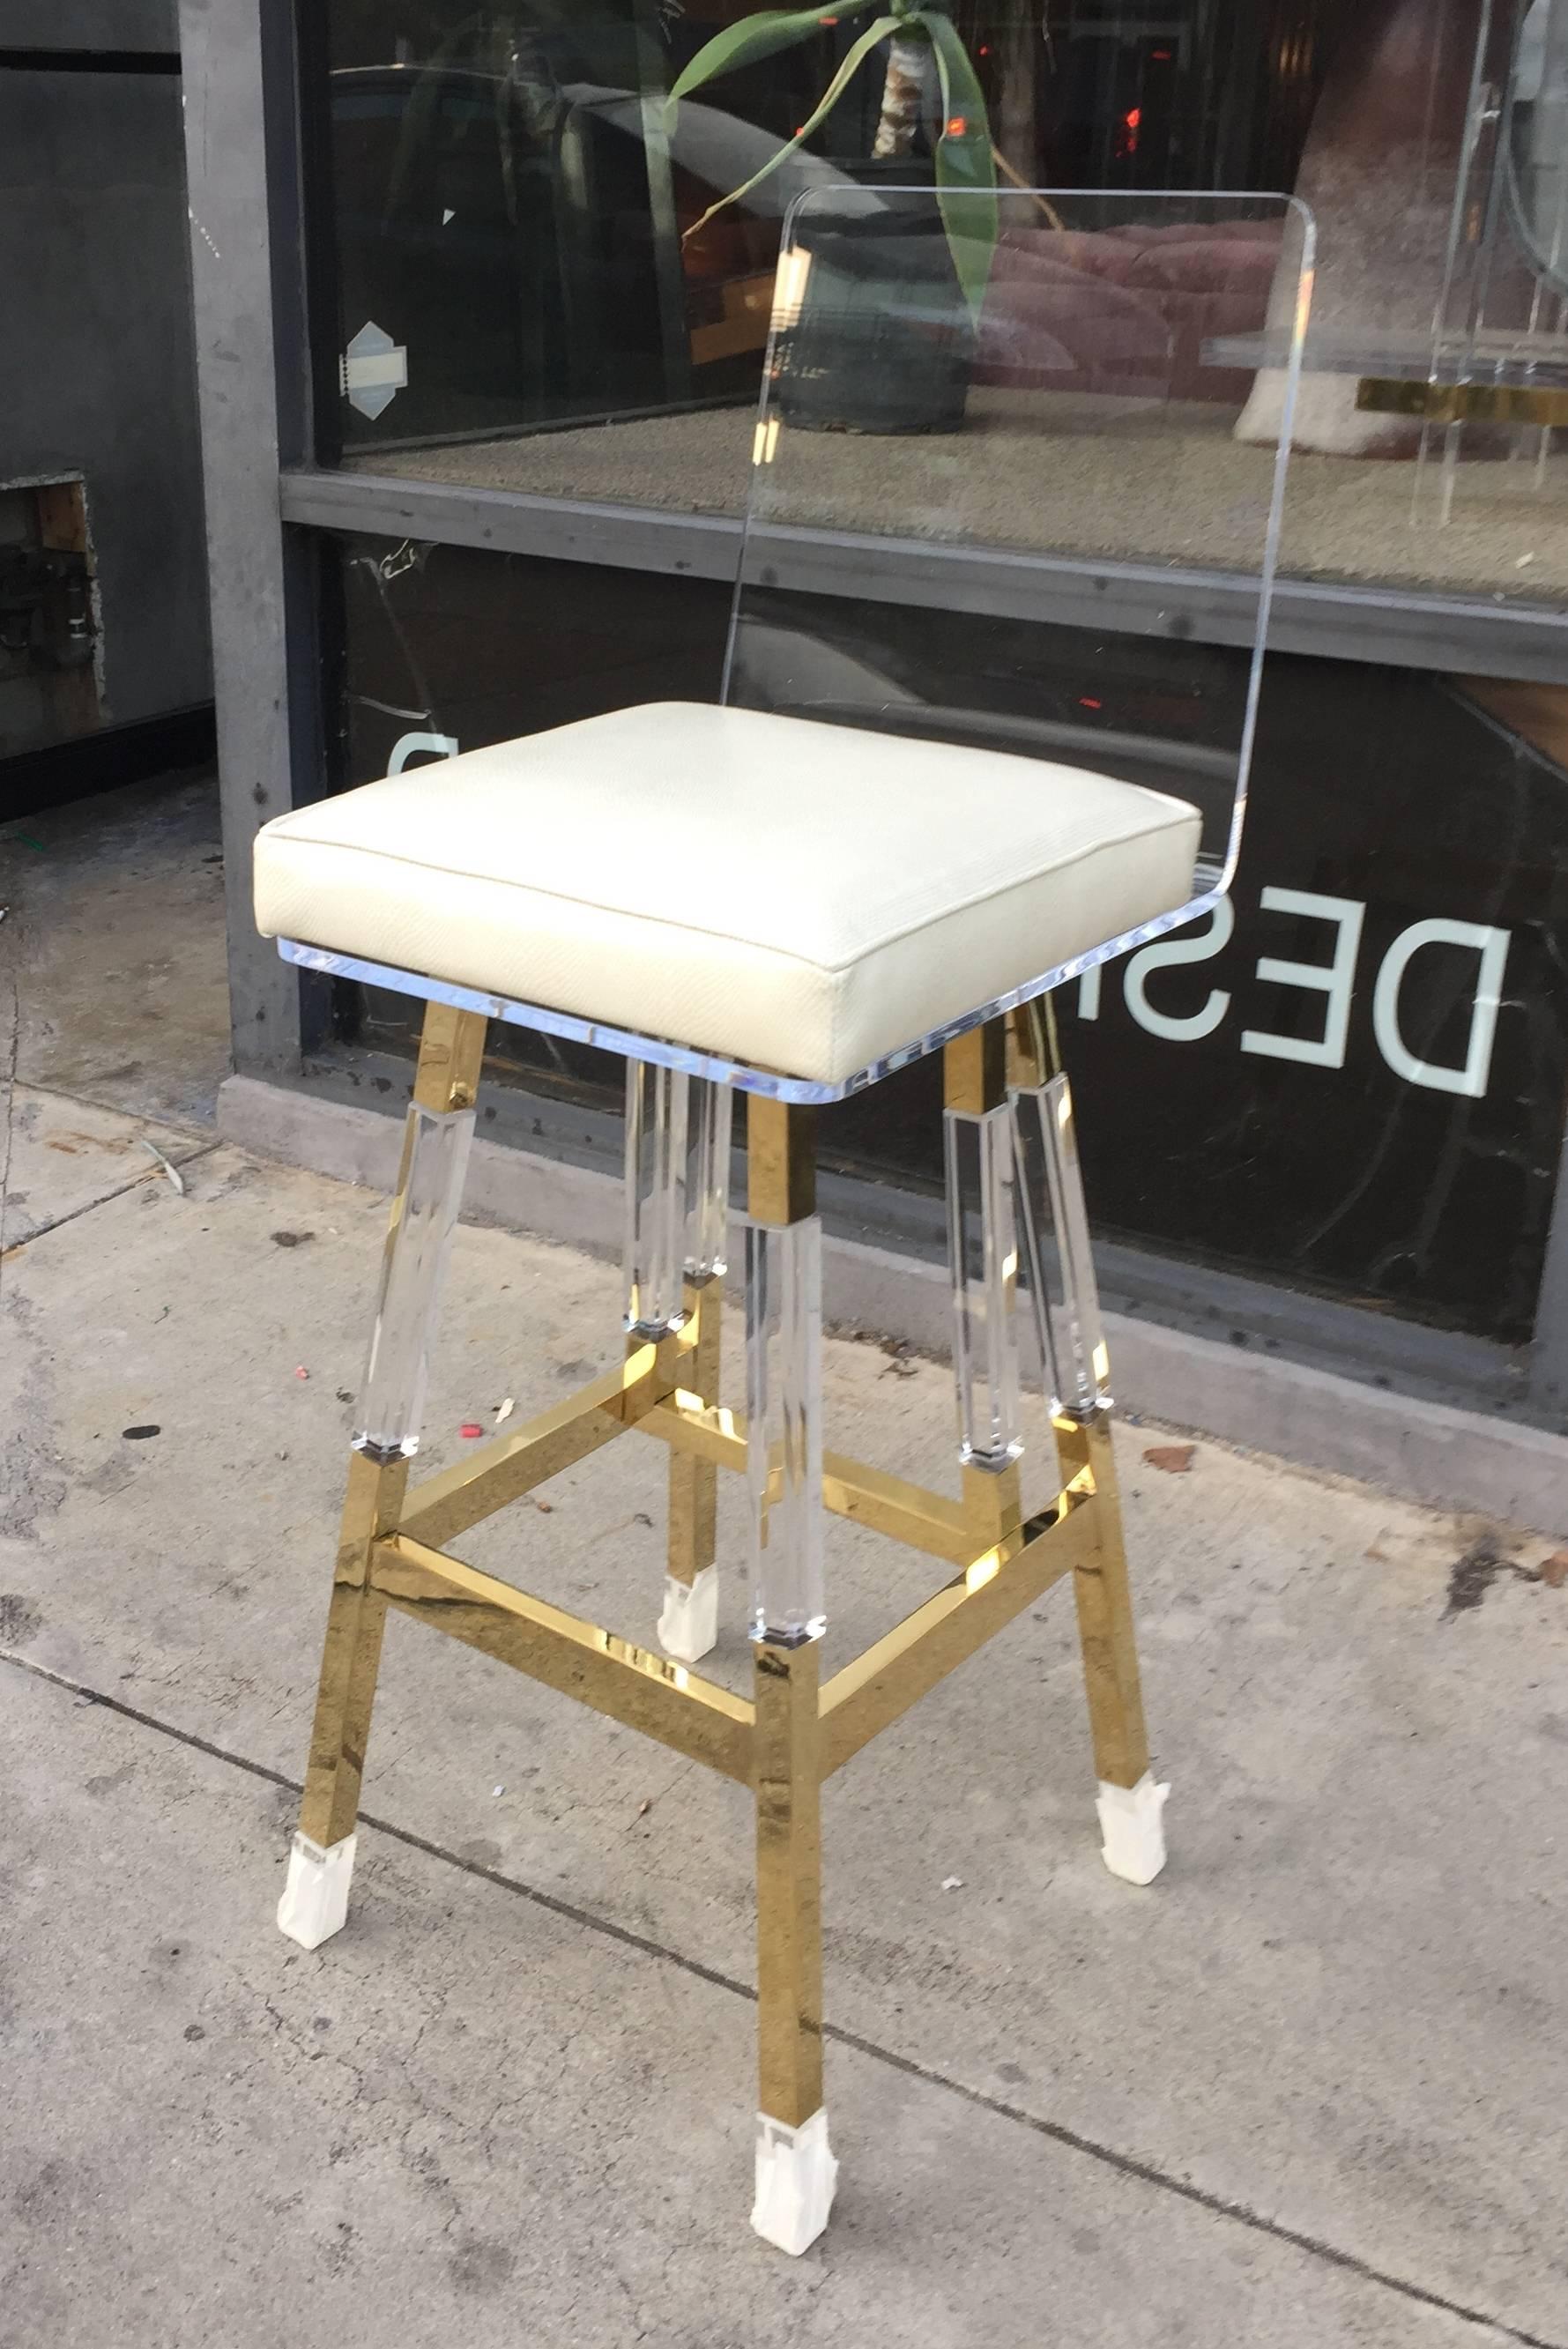 Beautiful set of four bar-stools designed by Charles Hollis Jones in the 1970s, this design is a blend of his Metric collection and the waterfall line and the design was executed beautifully.
The frame is made out of solid brass and polished Lucite